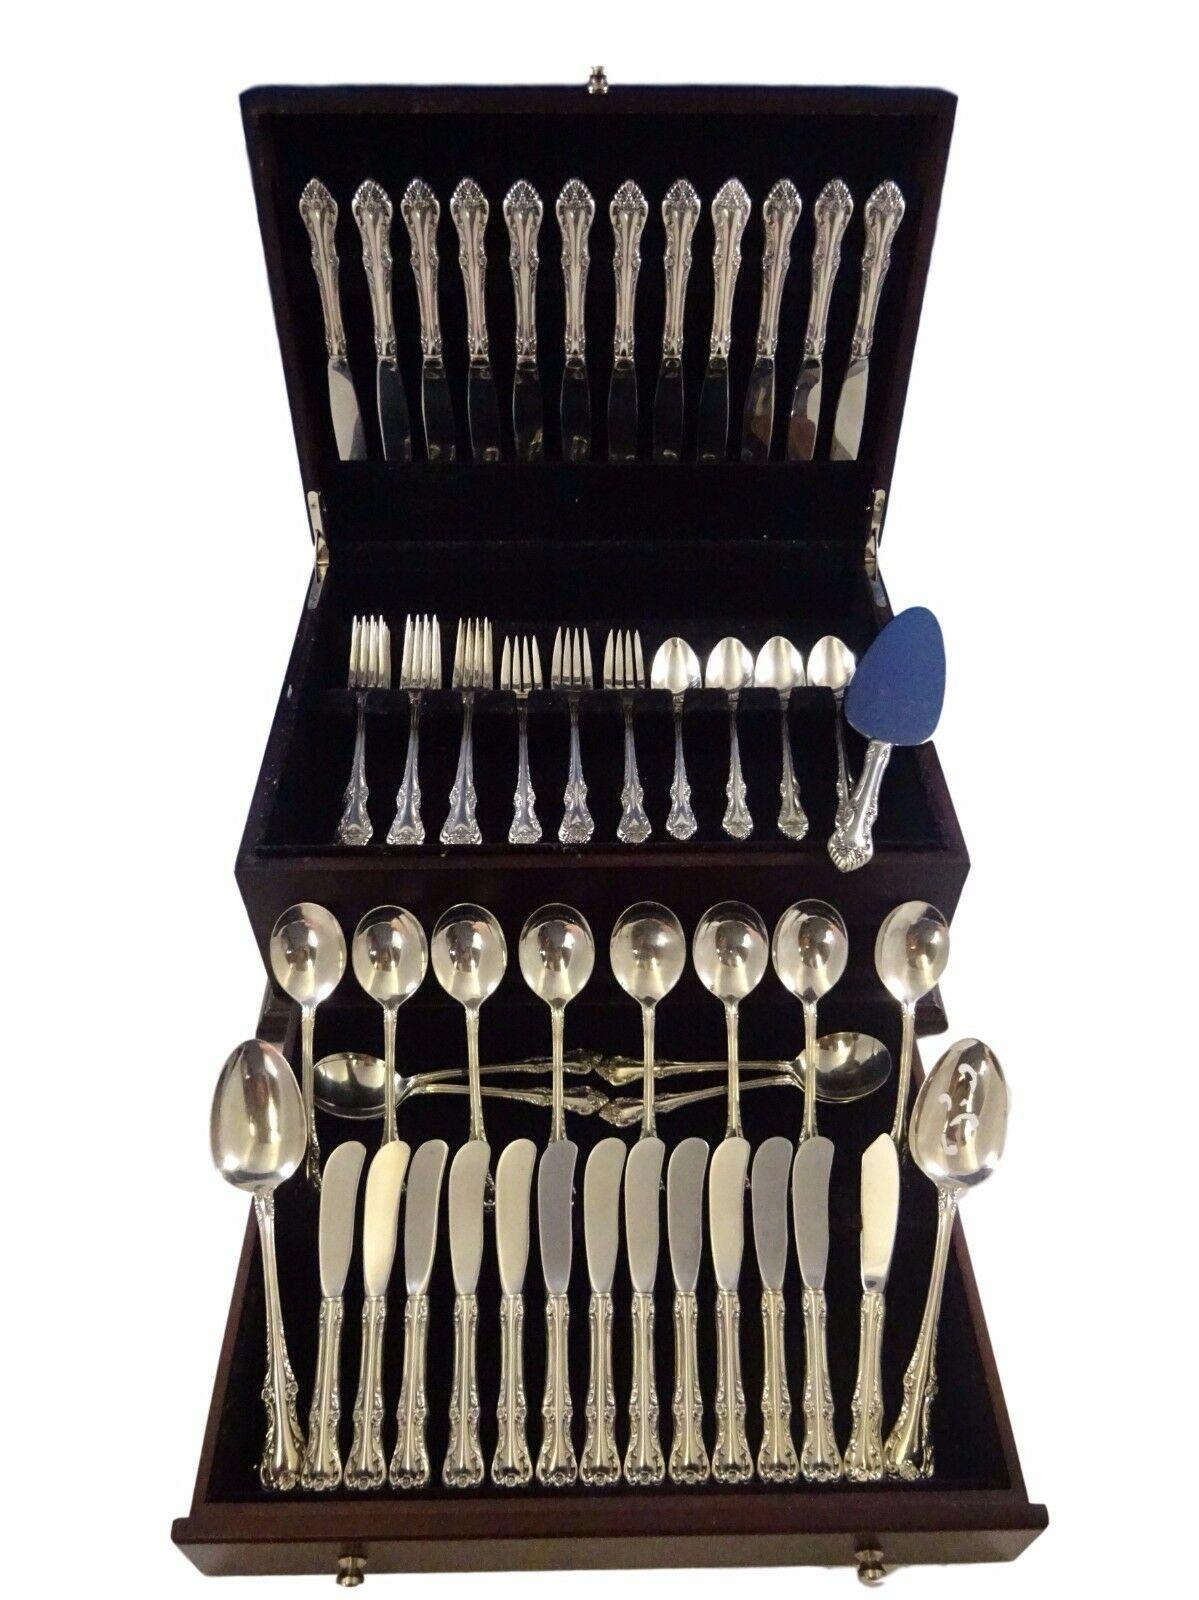 Melbourne by Oneida Sterling silver flatware set - 76 pieces. This set includes:

12 knives, 8 7/8